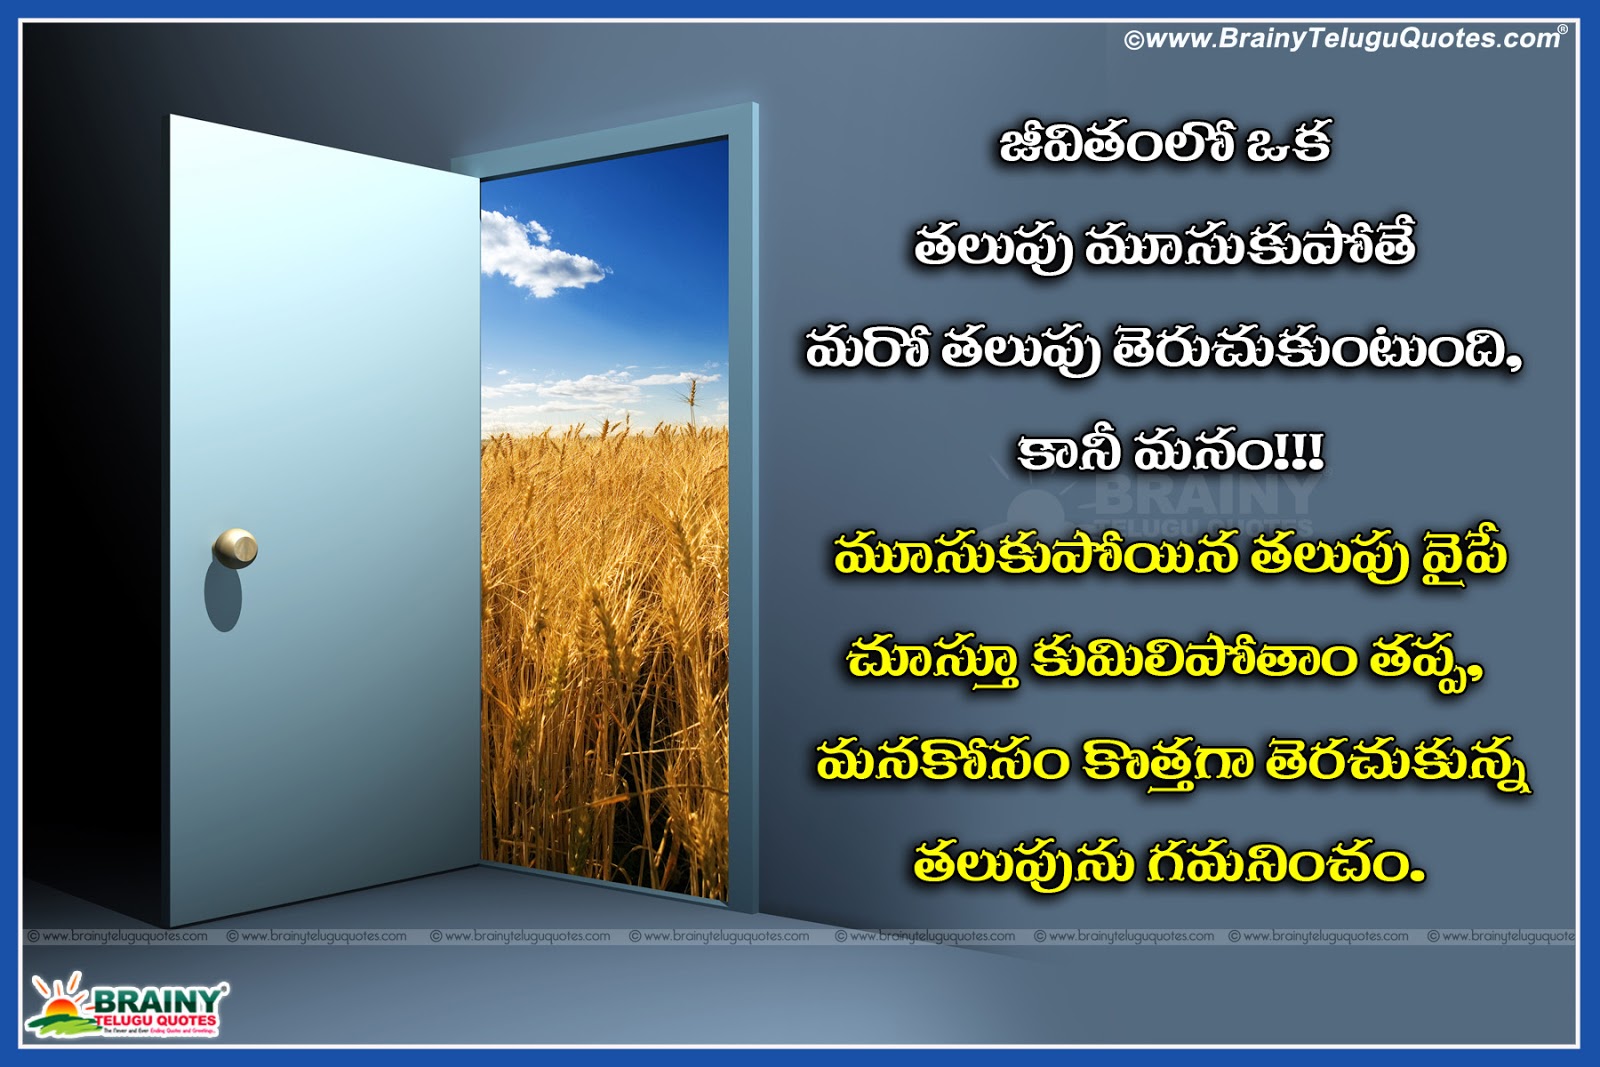 Life Success and Failure Inspirational Telugu Thoughts hd wallpapers Brainy